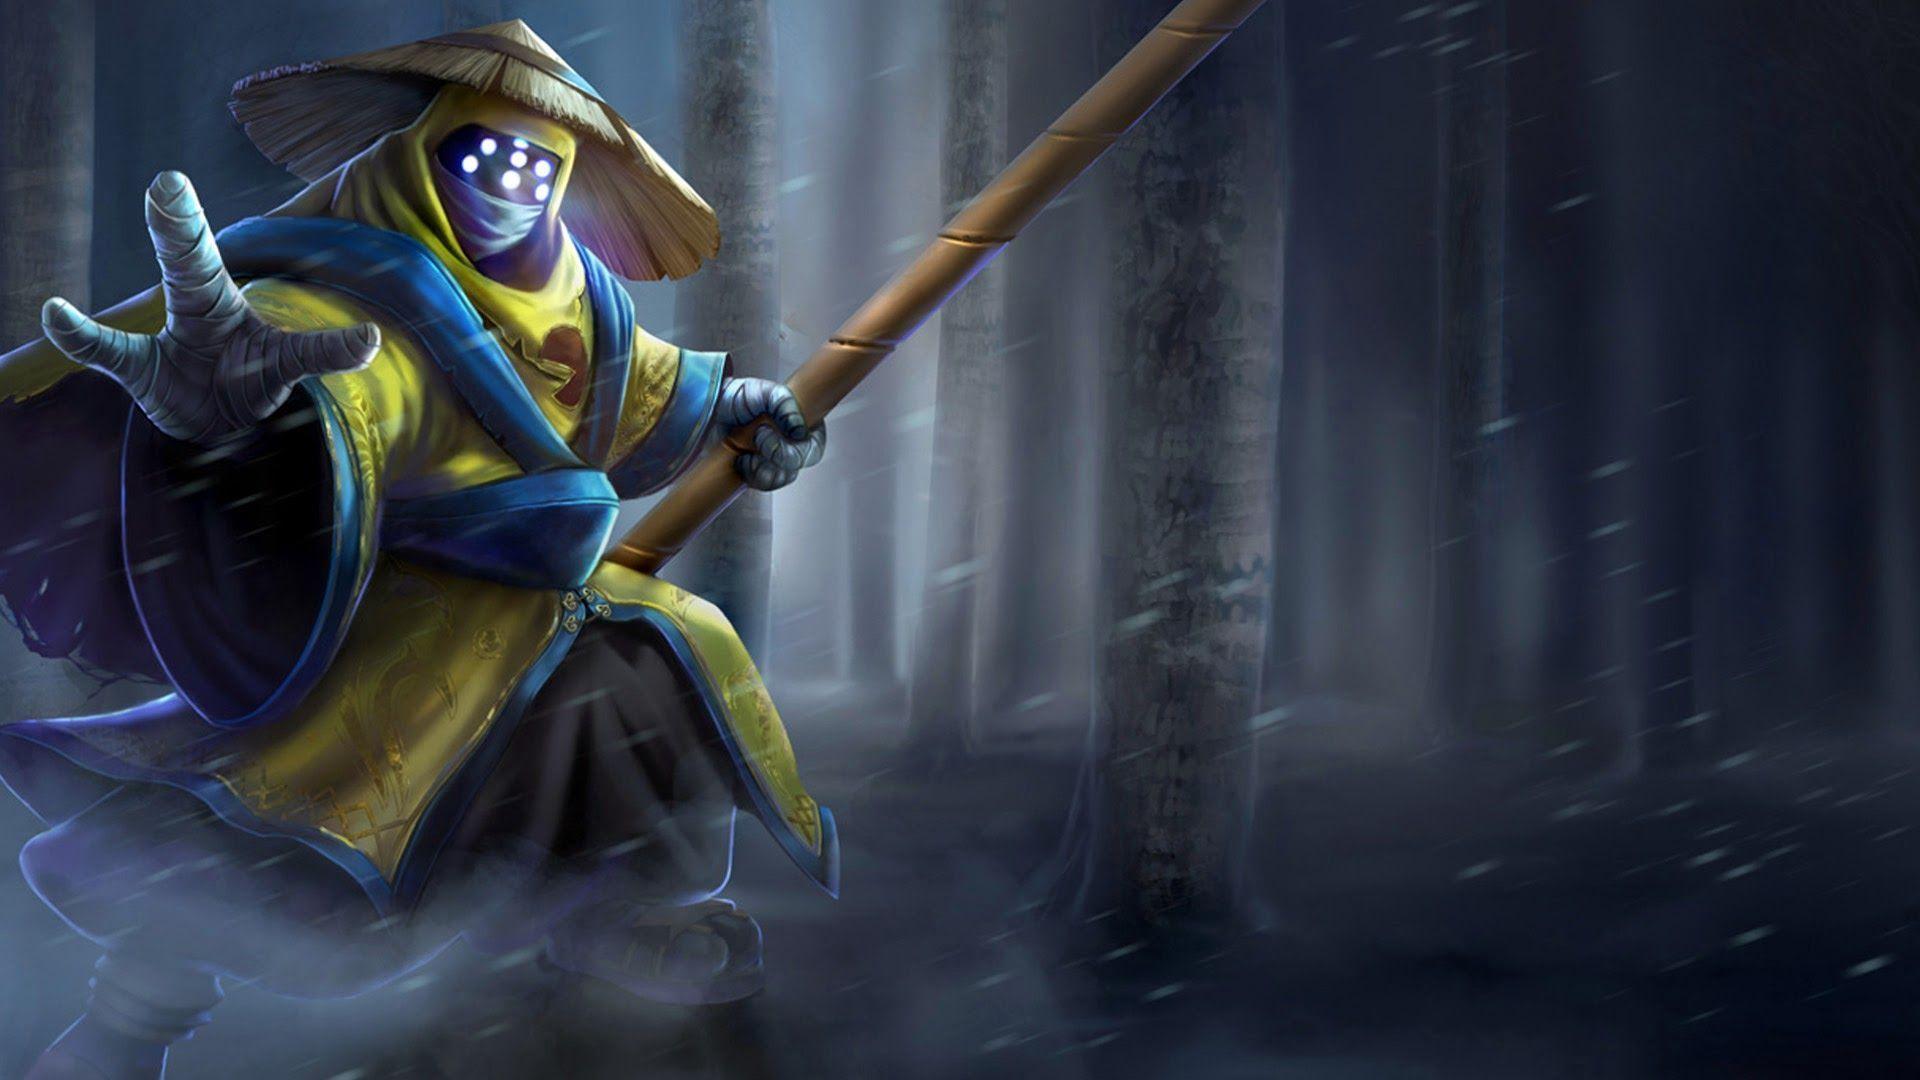 HD Jax in the forest of Legends Wallpaper. Download Free